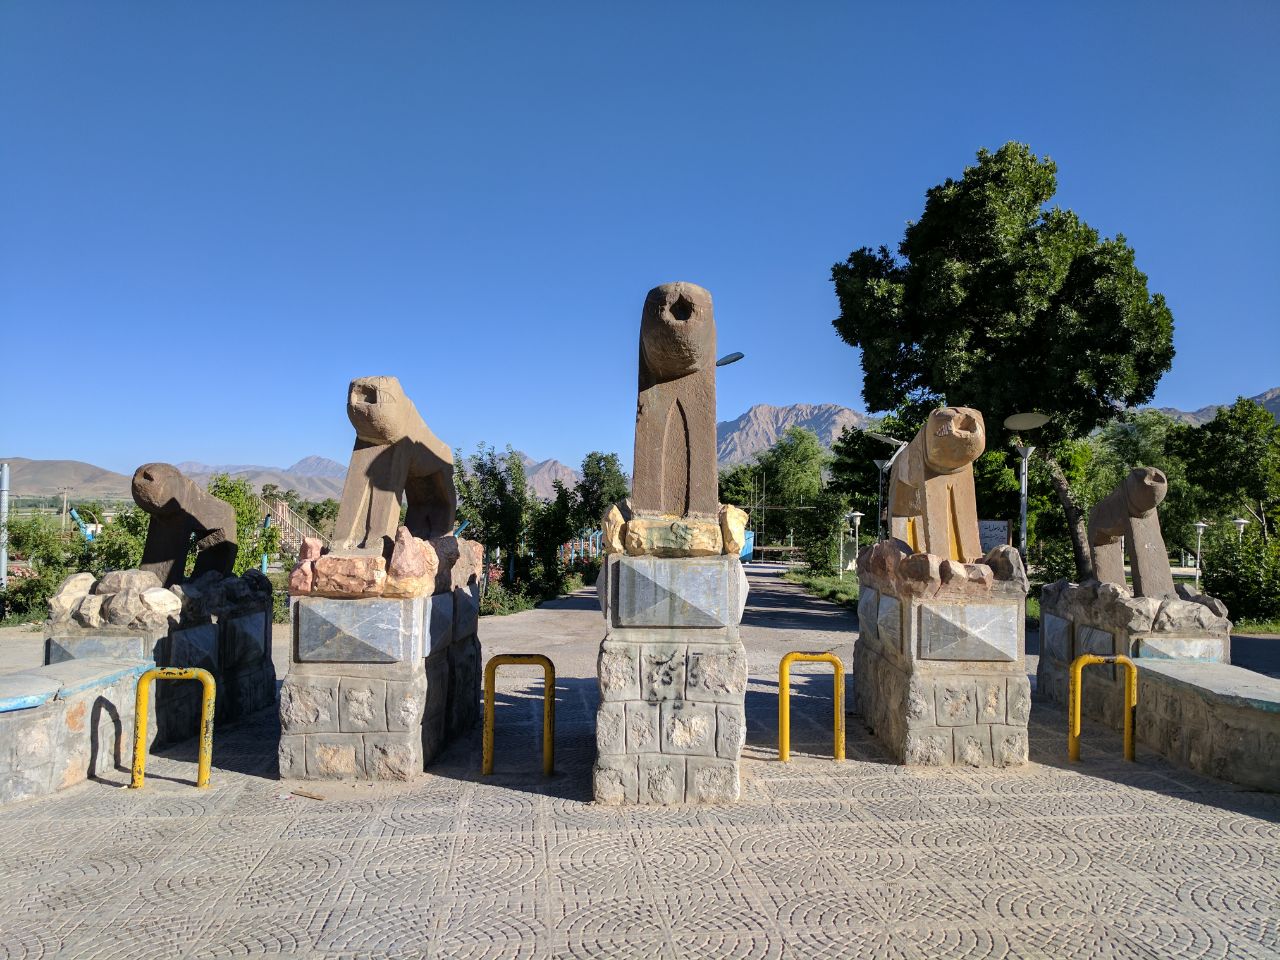 The Stone Lions, the Symbol of Bakhtiari People